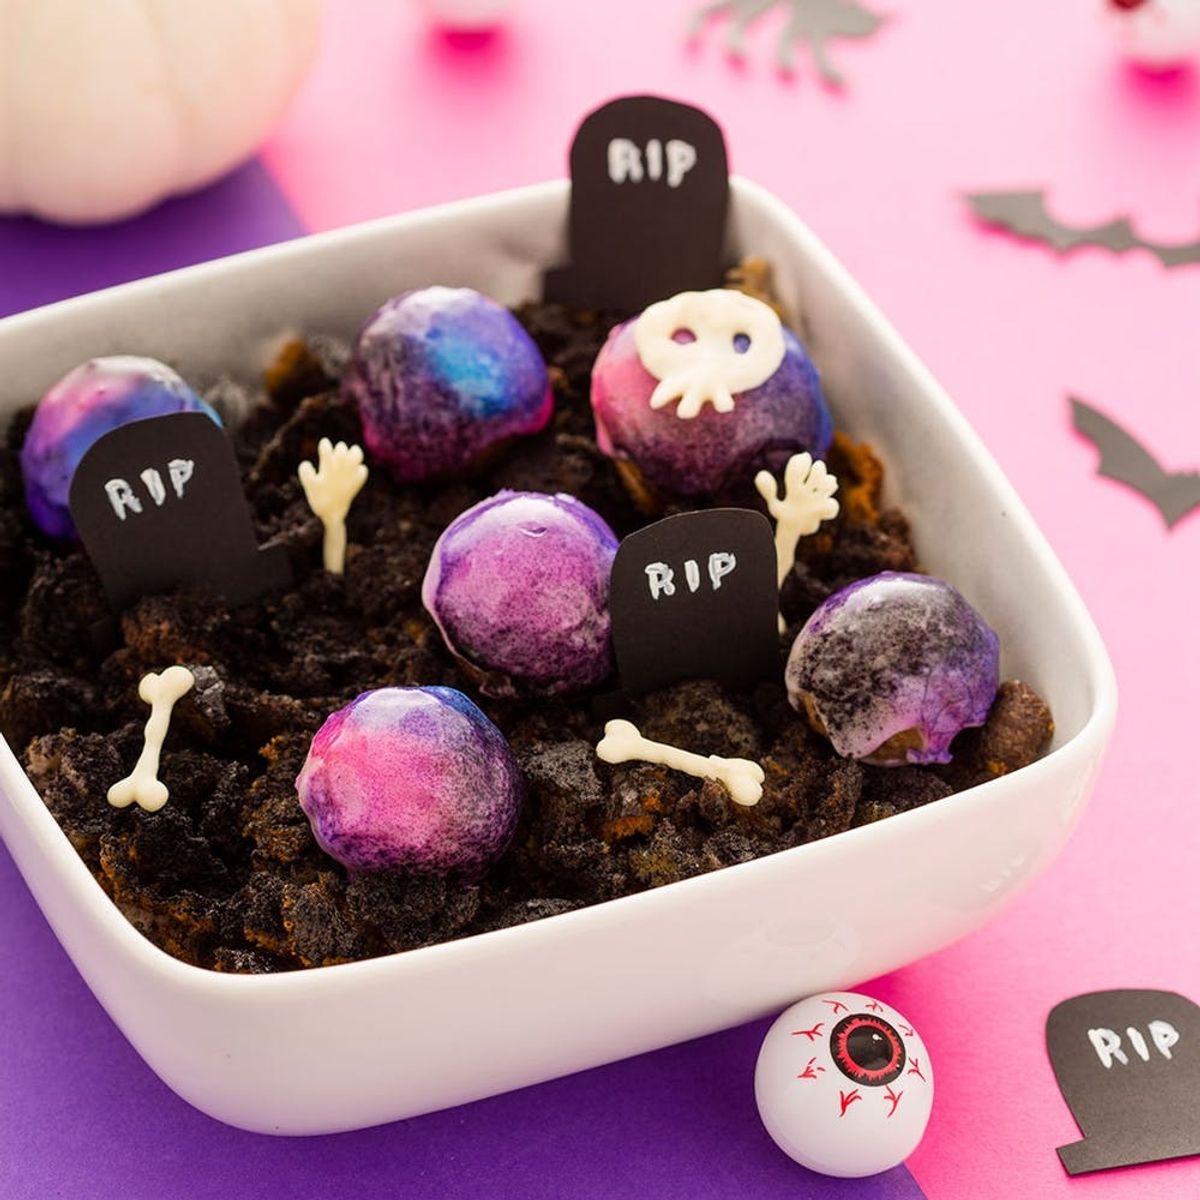 Your Halloween Bash Needs These Midnight Galaxy Donut Holes